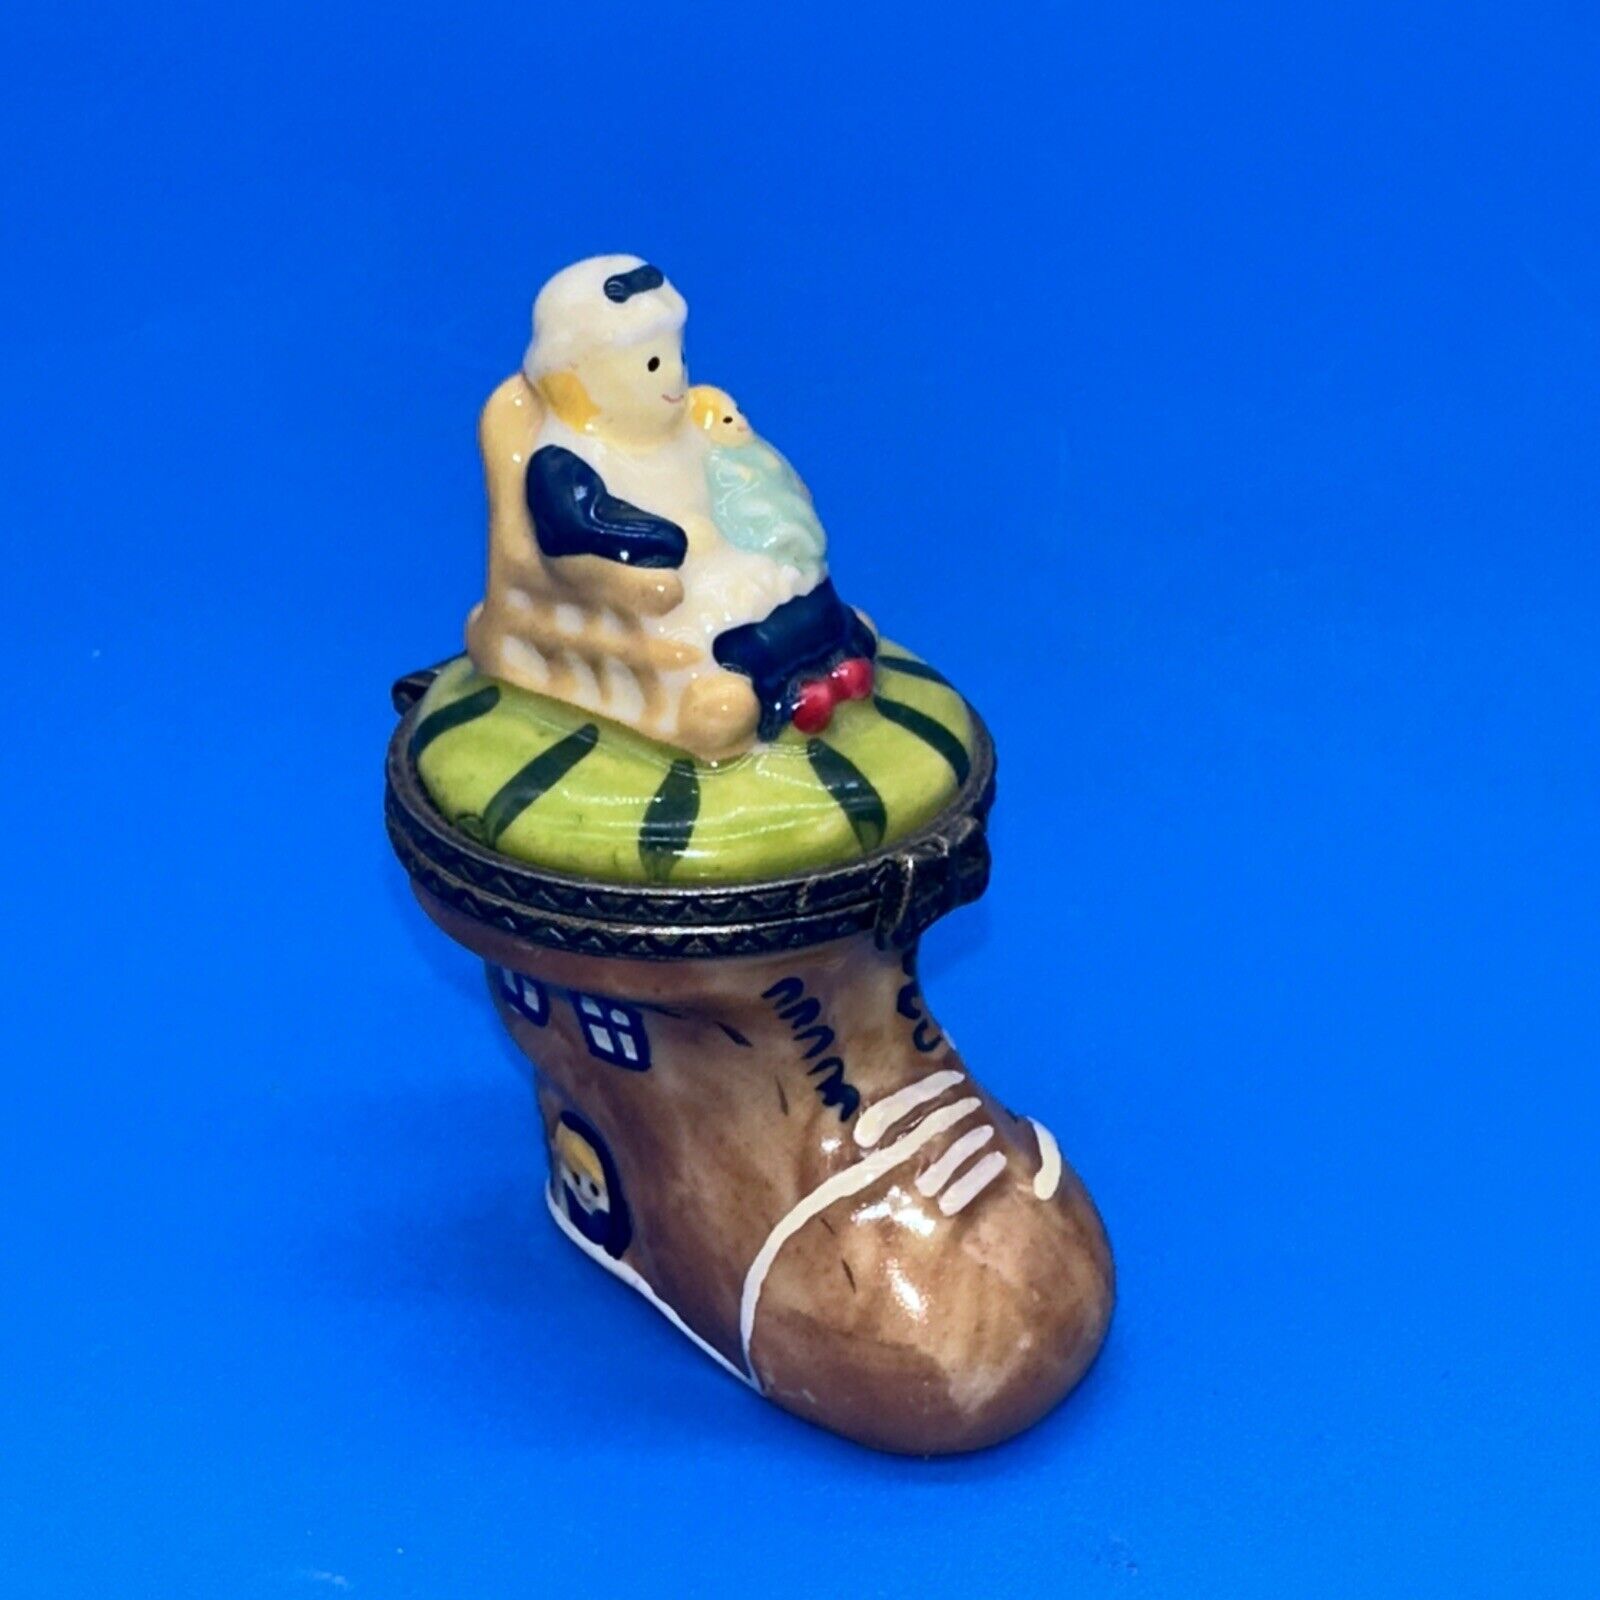 Cool VTG Old Woman Who Lived in a Shoe Ceramic Trinket Box w/Baby Trinket Inside